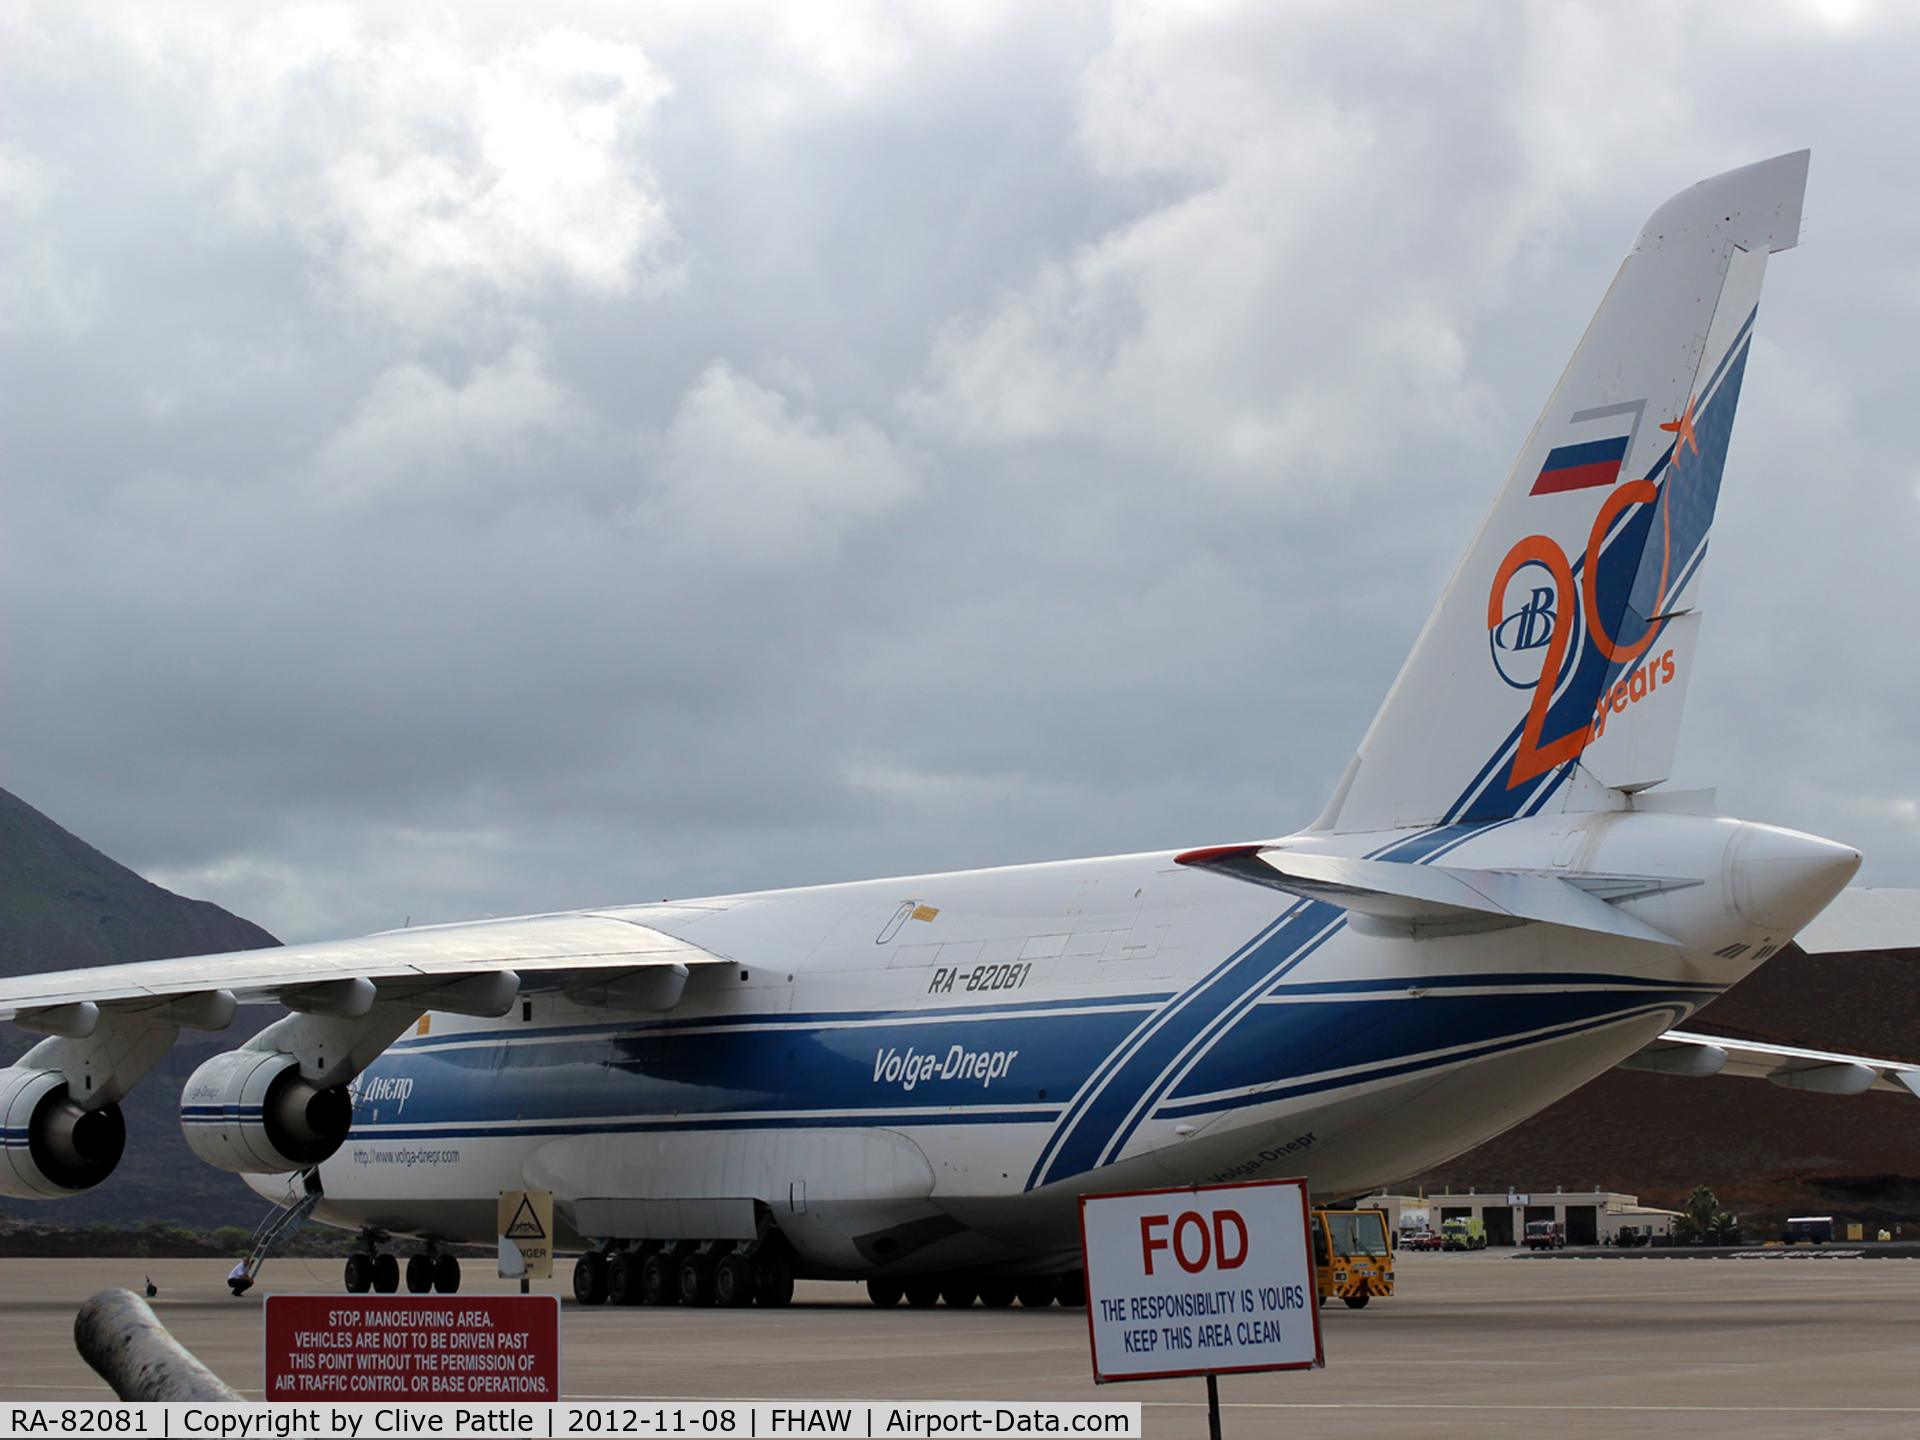 RA-82081, 2004 Antonov An-124-100M Ruslan C/N 9773051462165, On the ramp at Ascension Island - note anniversary markings on tail